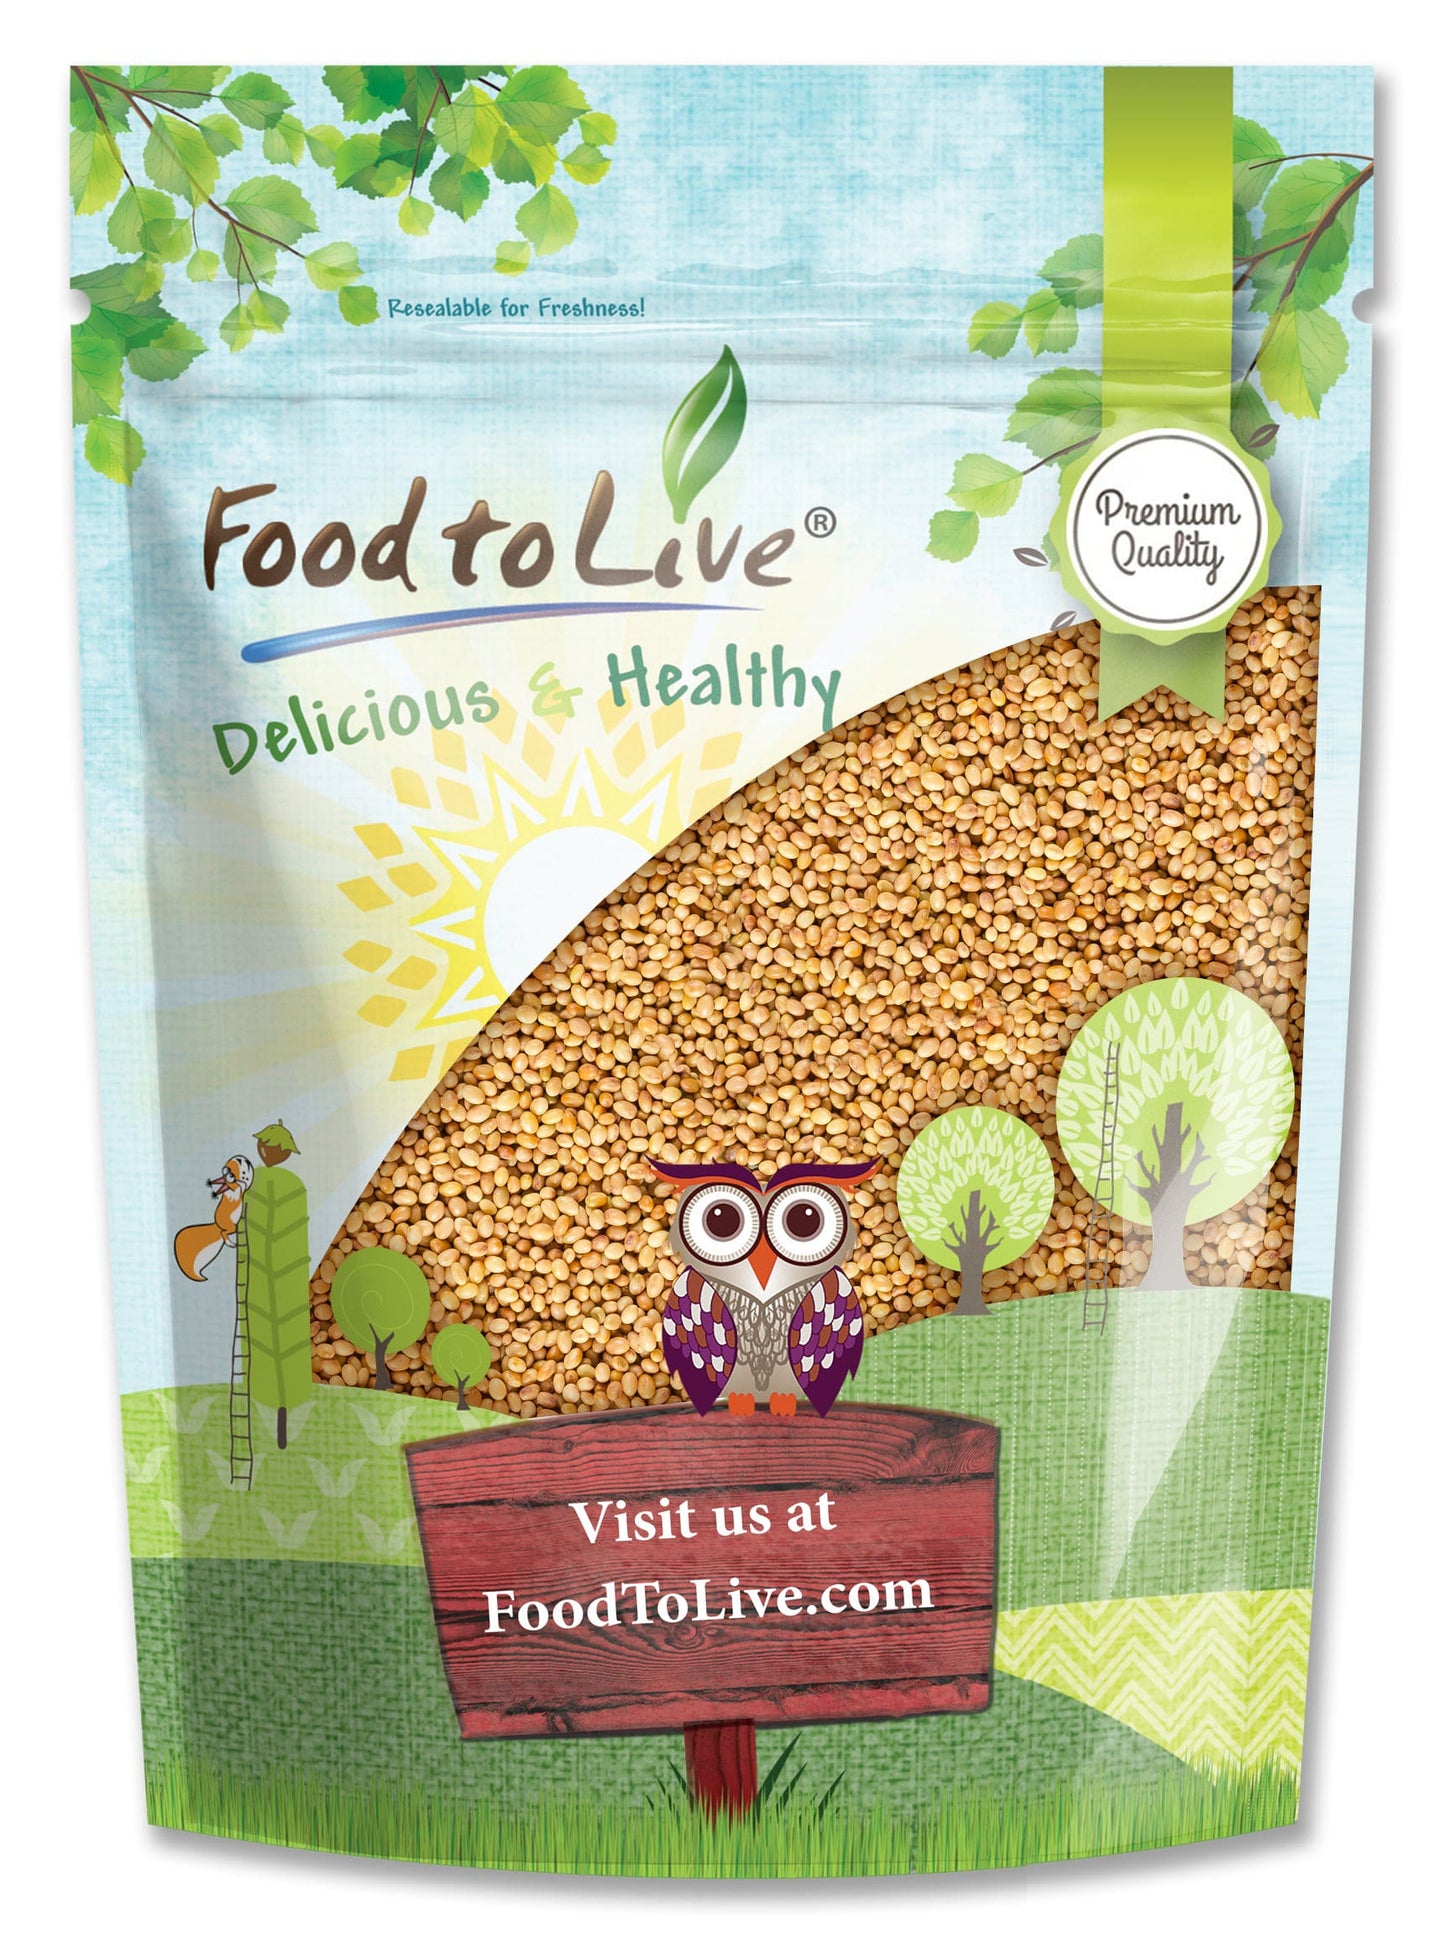 Clover Seeds for Sprouting — Non-GMO Verified, Kosher - by Food to Live